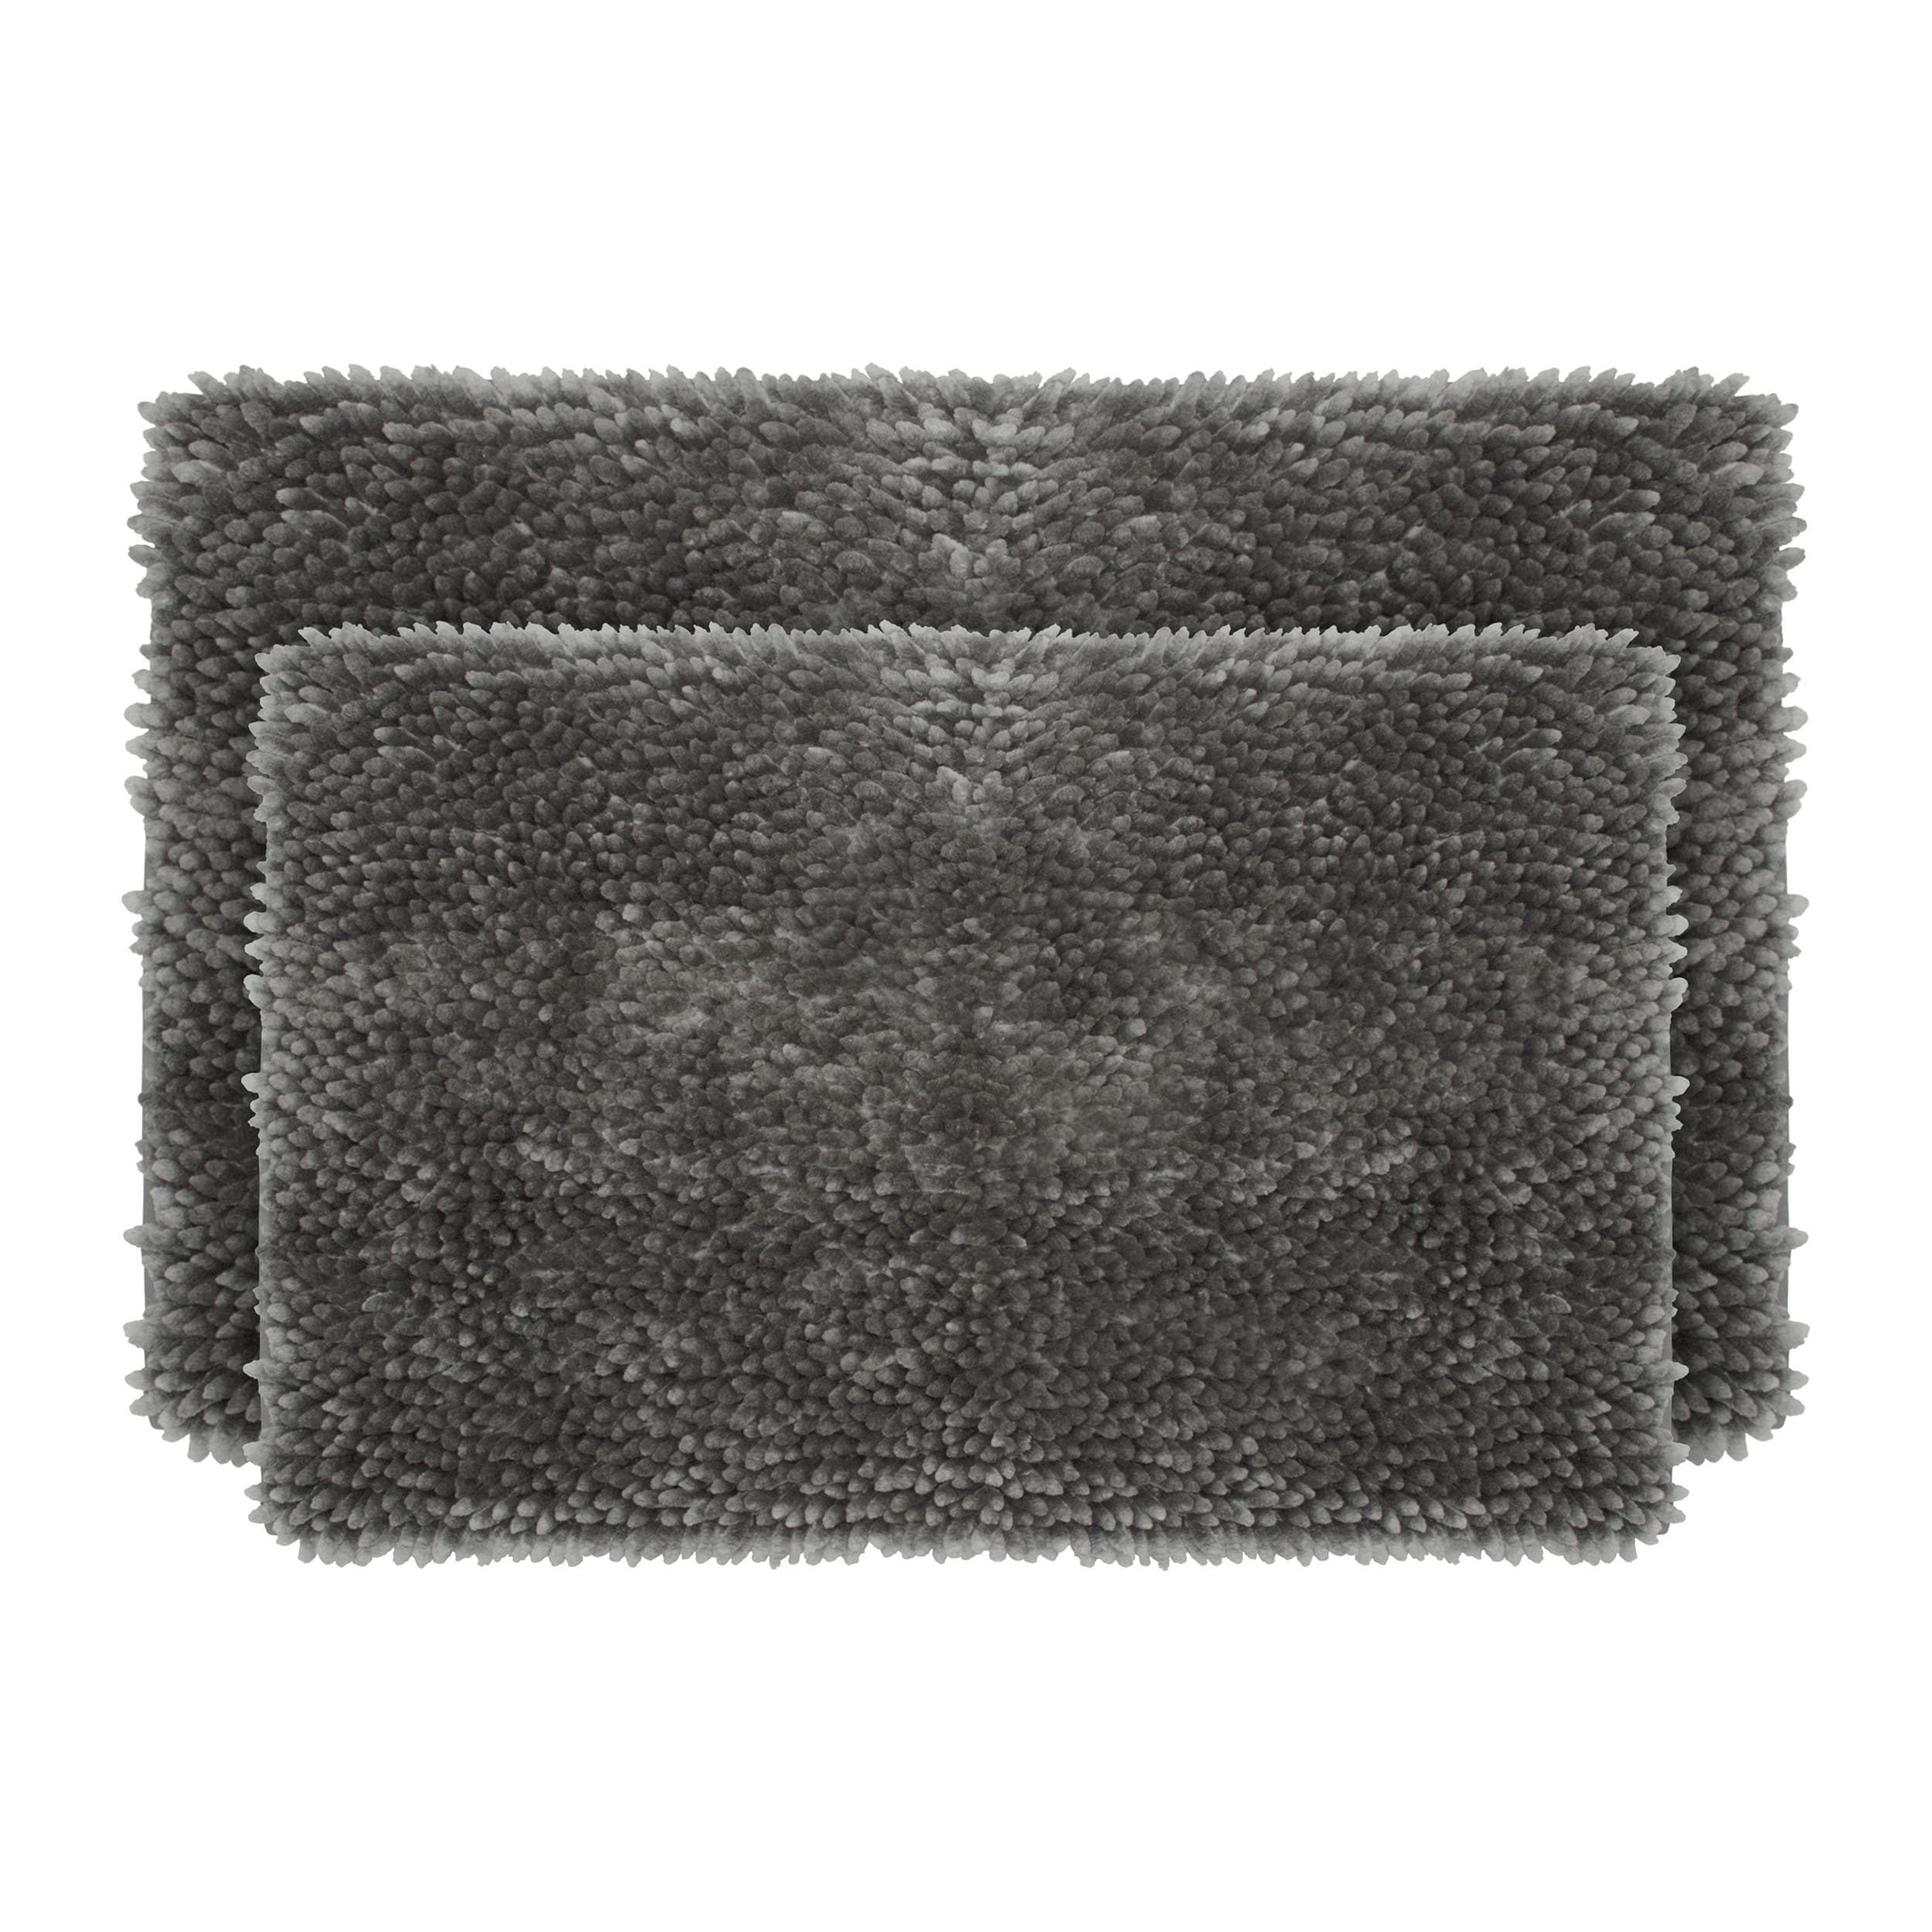 Juicy Couture Butter Chenille Bath Rug - Overstock - 29441156